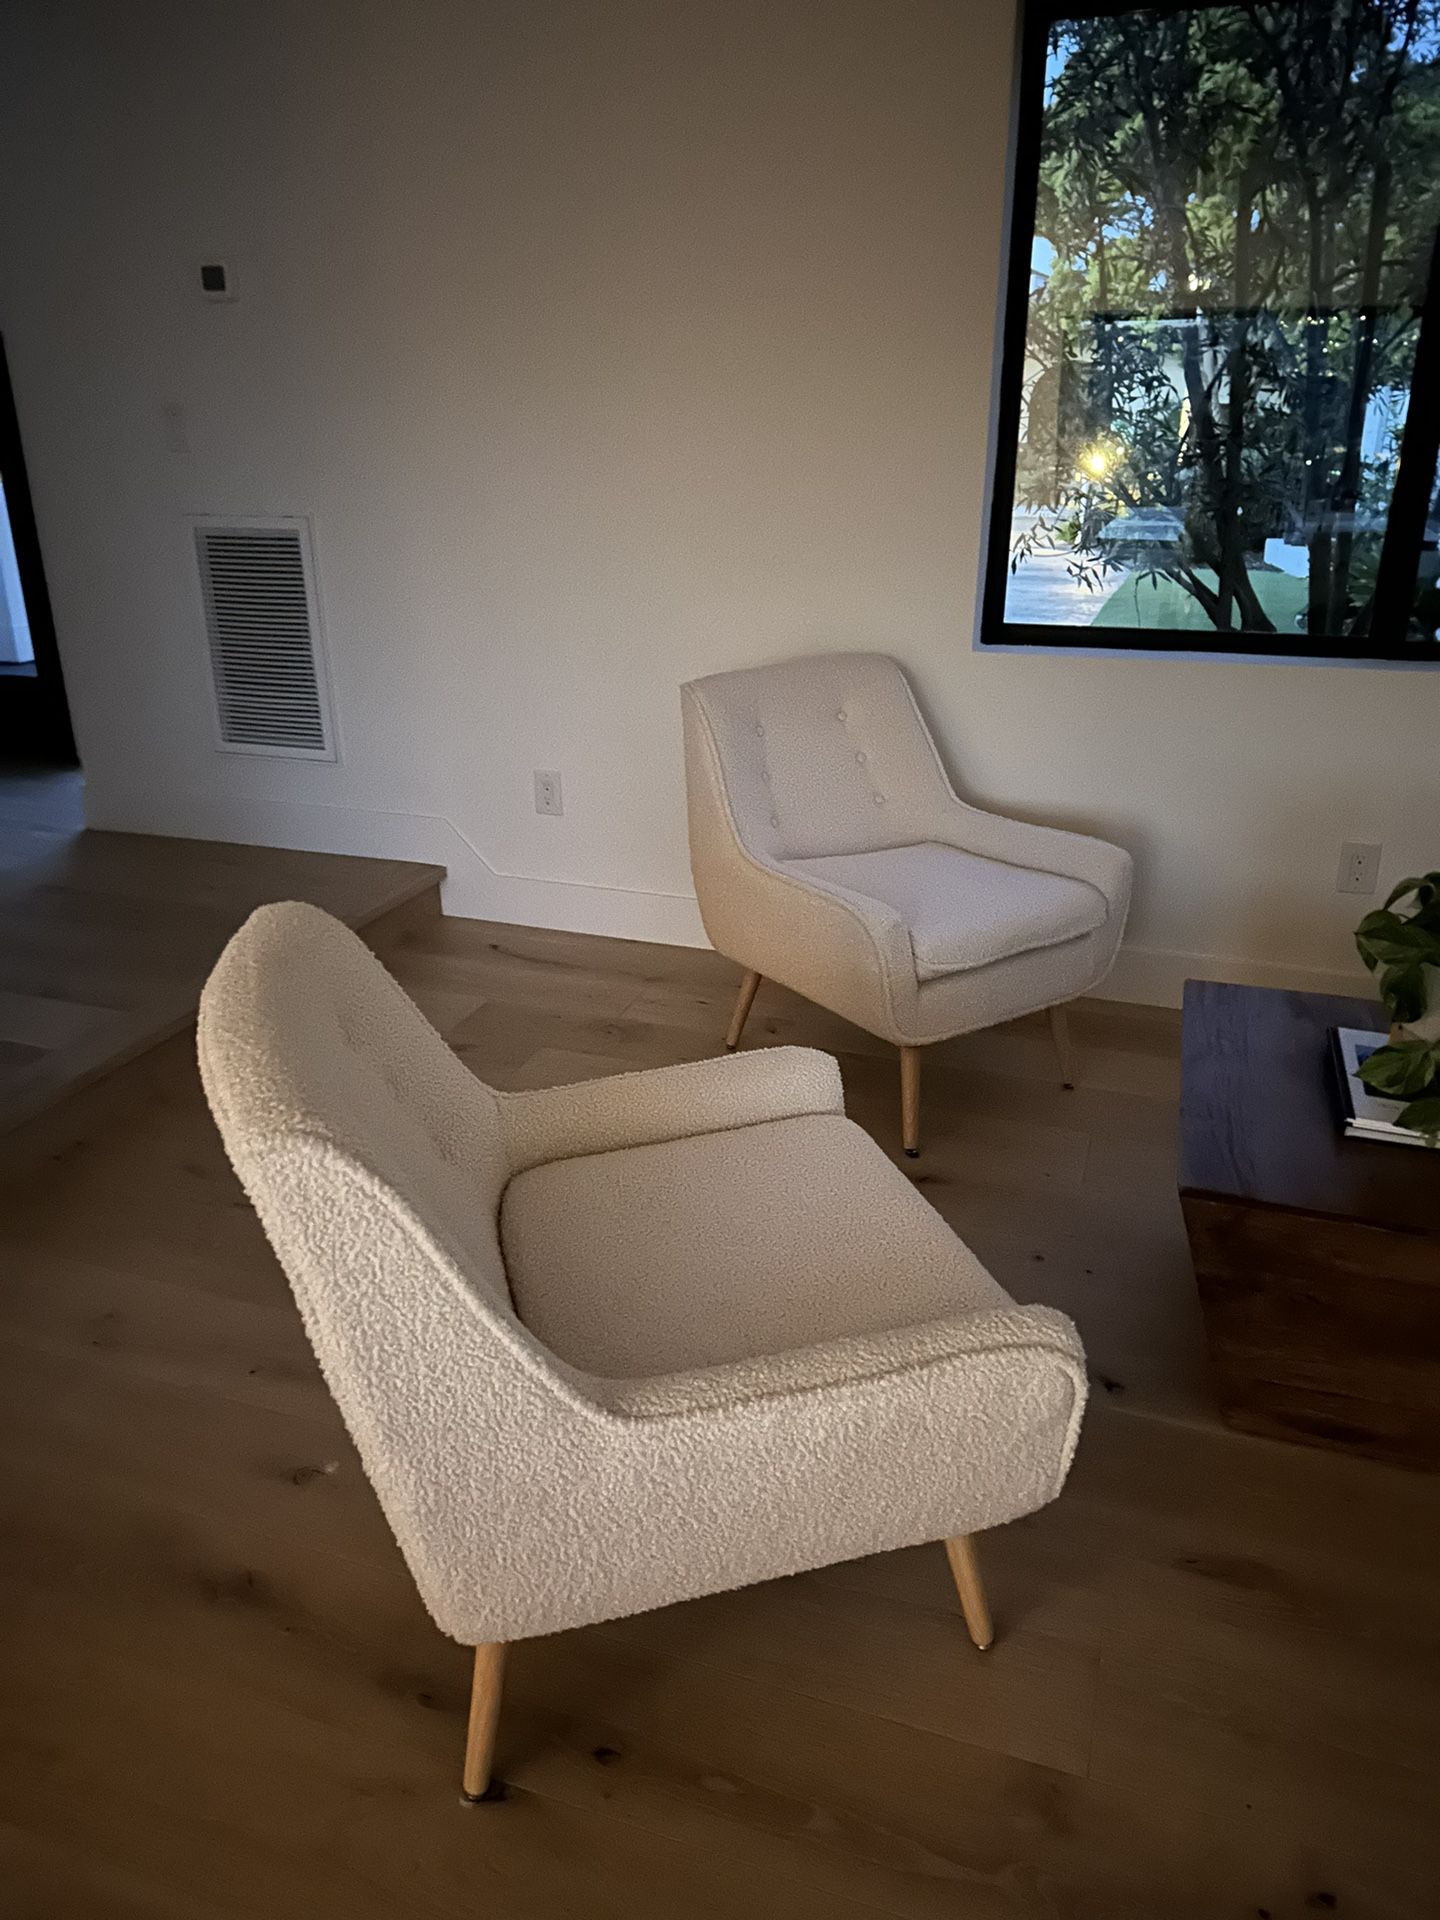 Near New 2 Accent  chairs Chair mid century modern